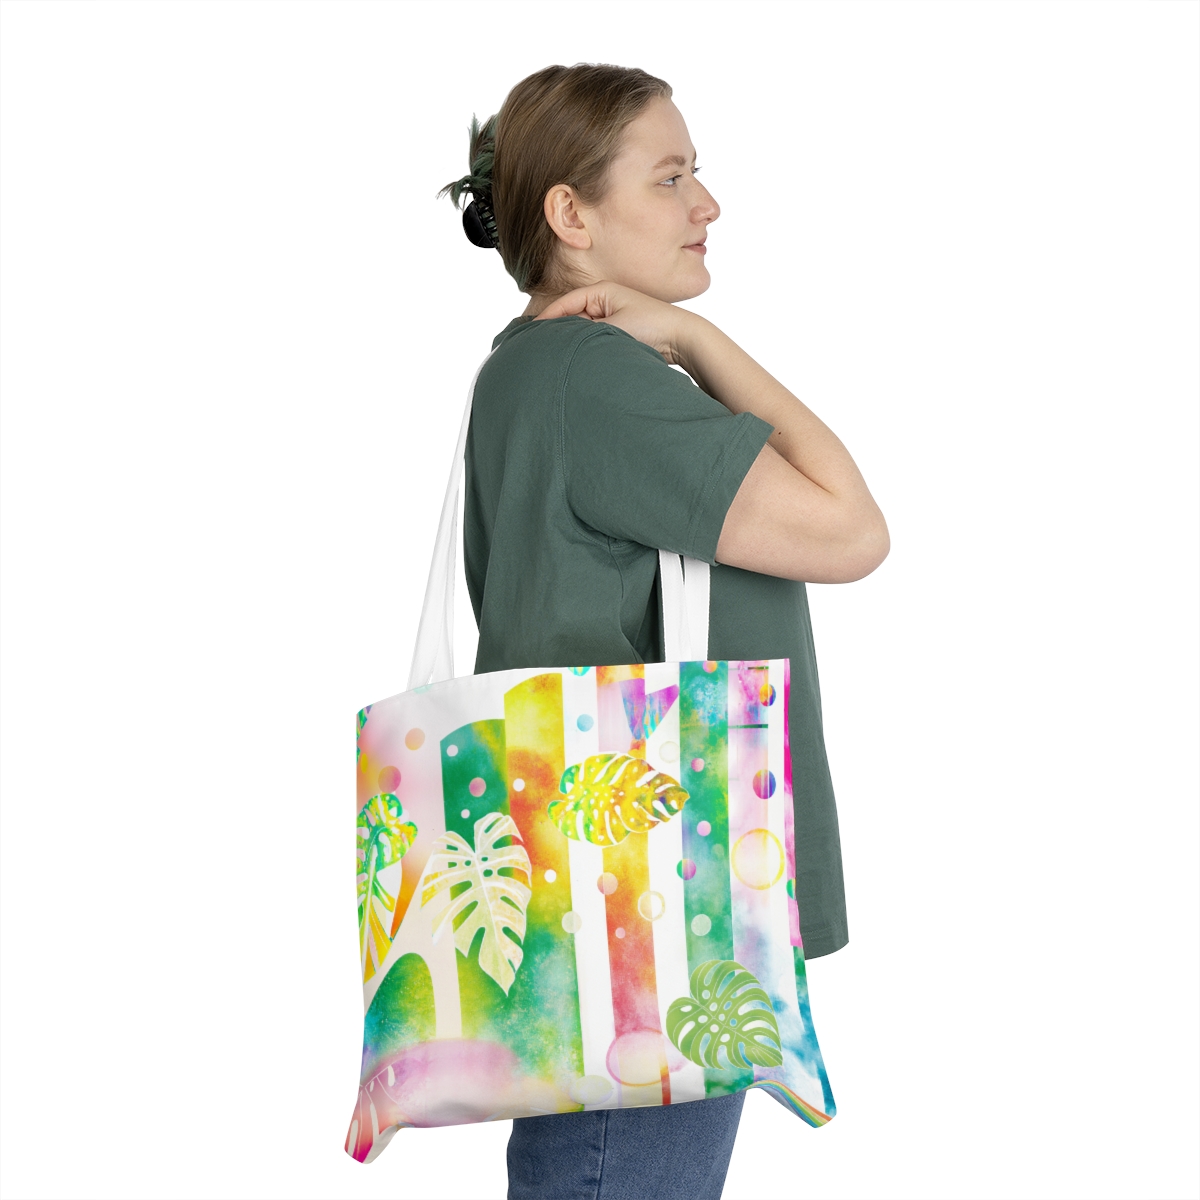 A woman holding the Pastel Monstera Shoulder Tote Bag by Green Thumb Nursery at a garden center near me.